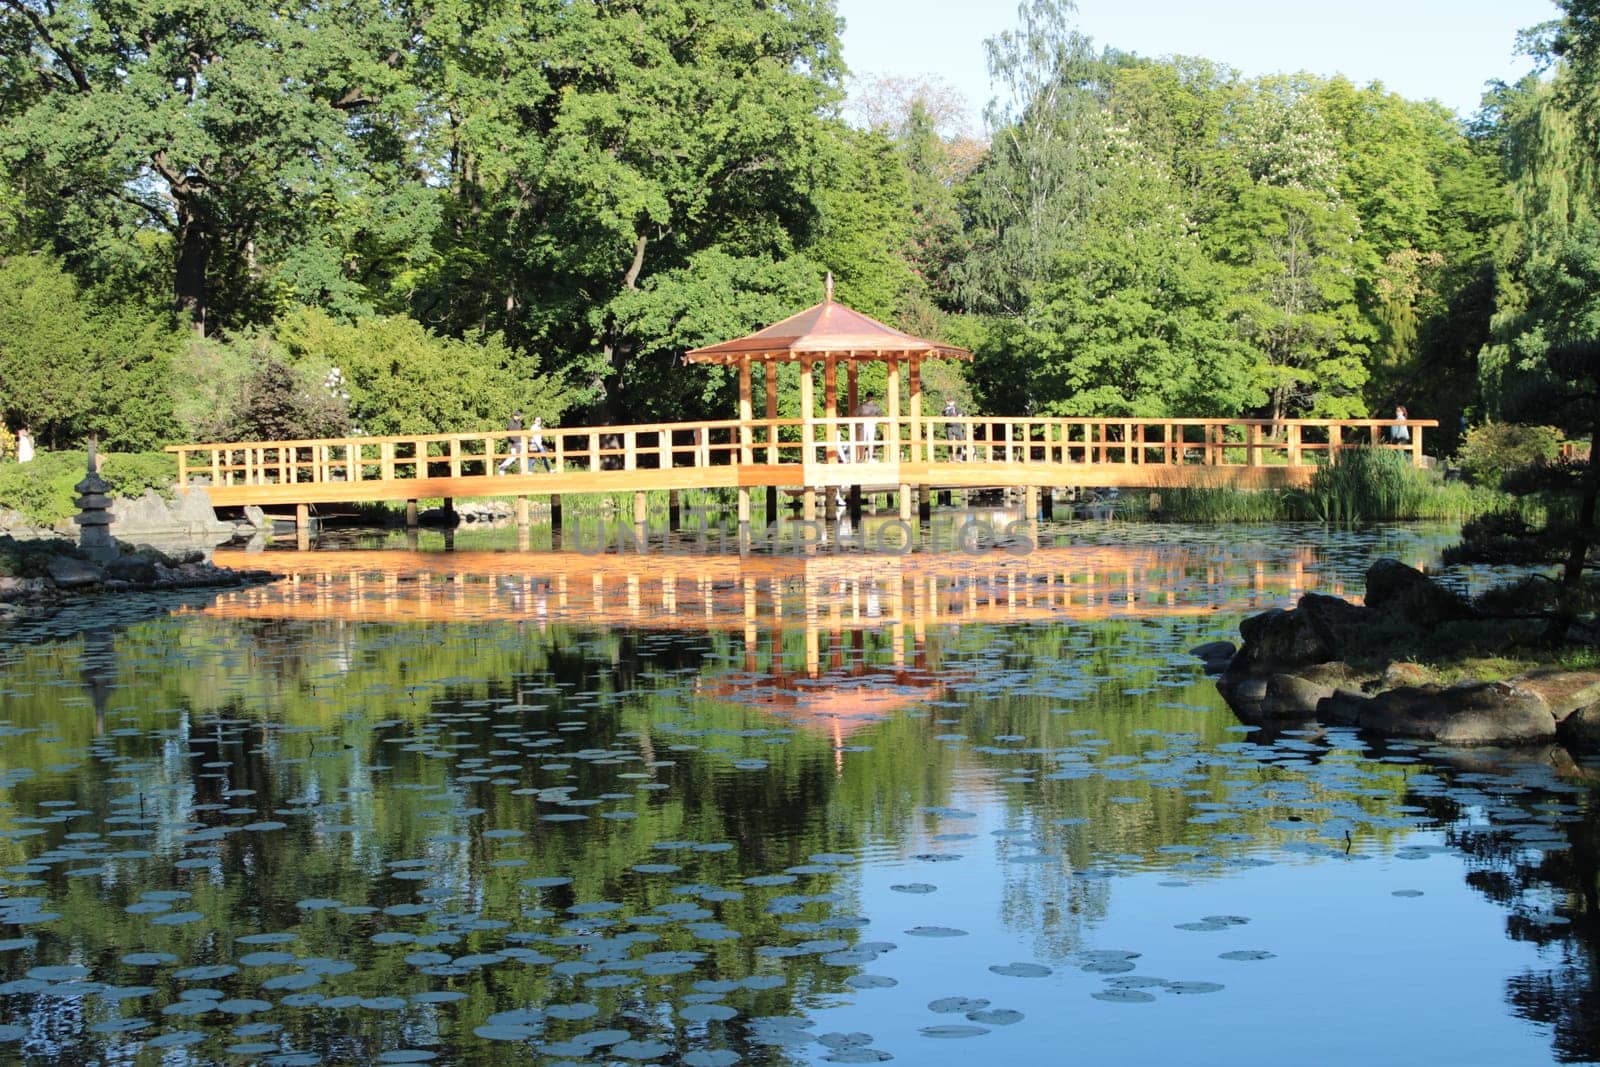 A wooden bridge and a gazebo across the river in a picturesque garden. High quality photo